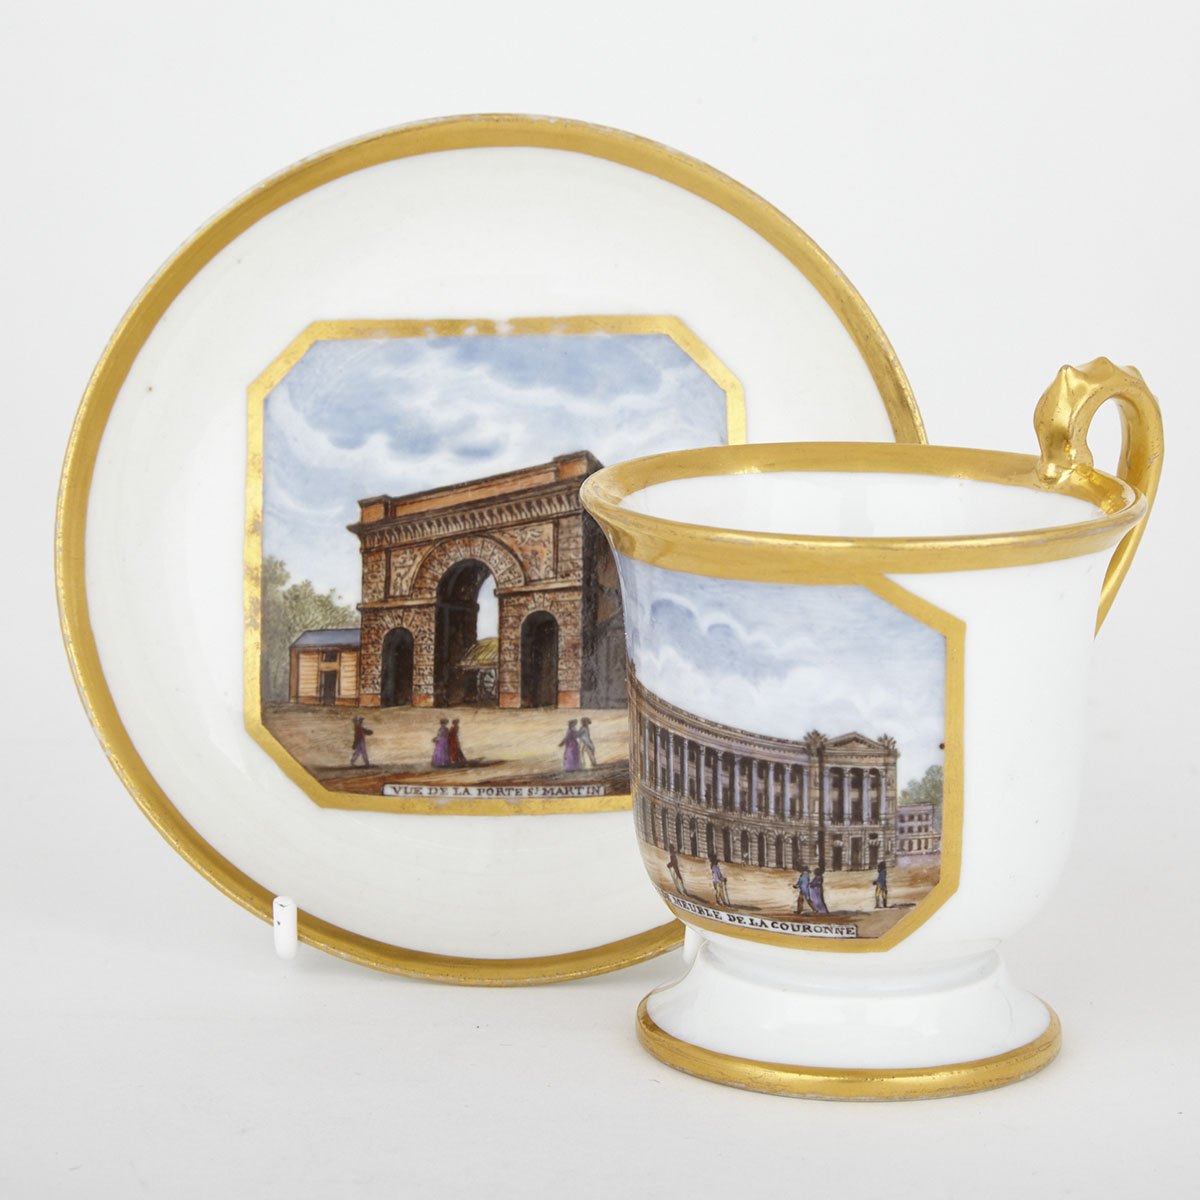 ‘Sèvres’ Topographical Cup and Saucer, mid-19th century